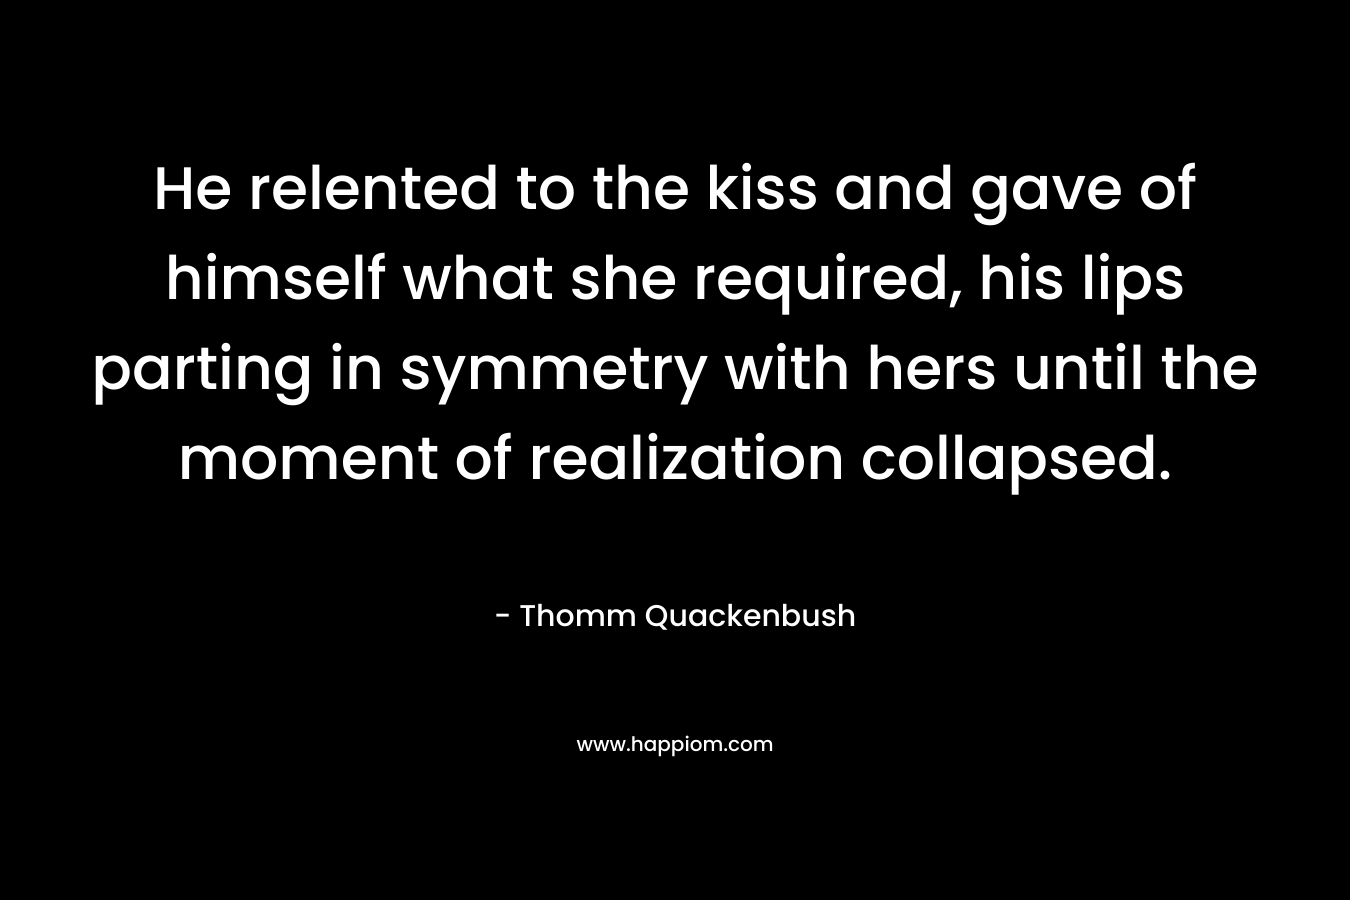 He relented to the kiss and gave of himself what she required, his lips parting in symmetry with hers until the moment of realization collapsed.